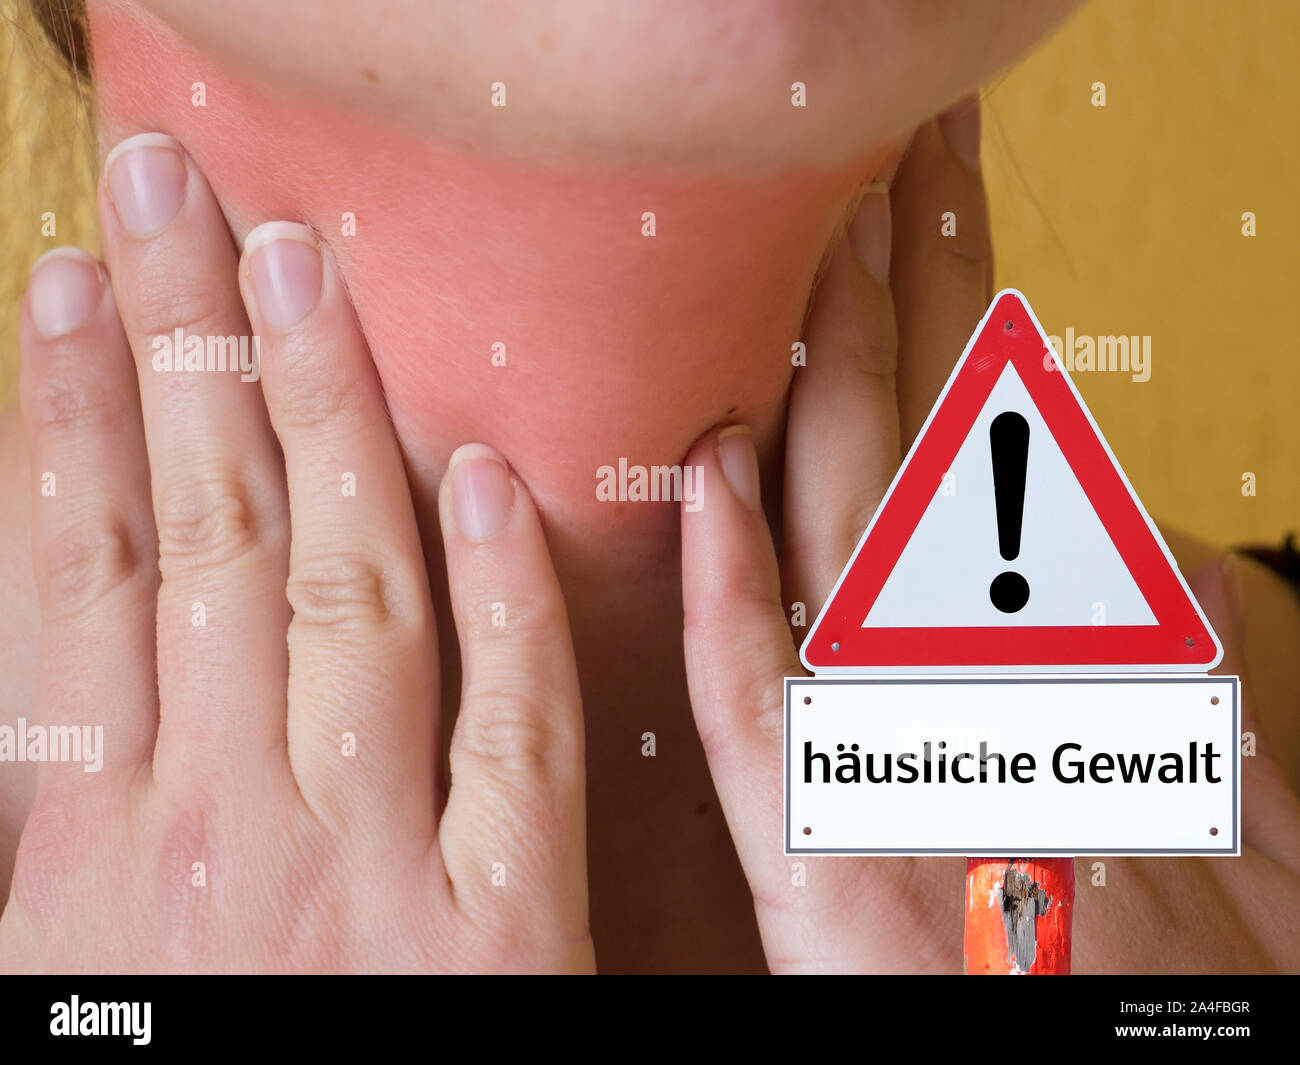 Warning sign domestic violence in german Stock Photo